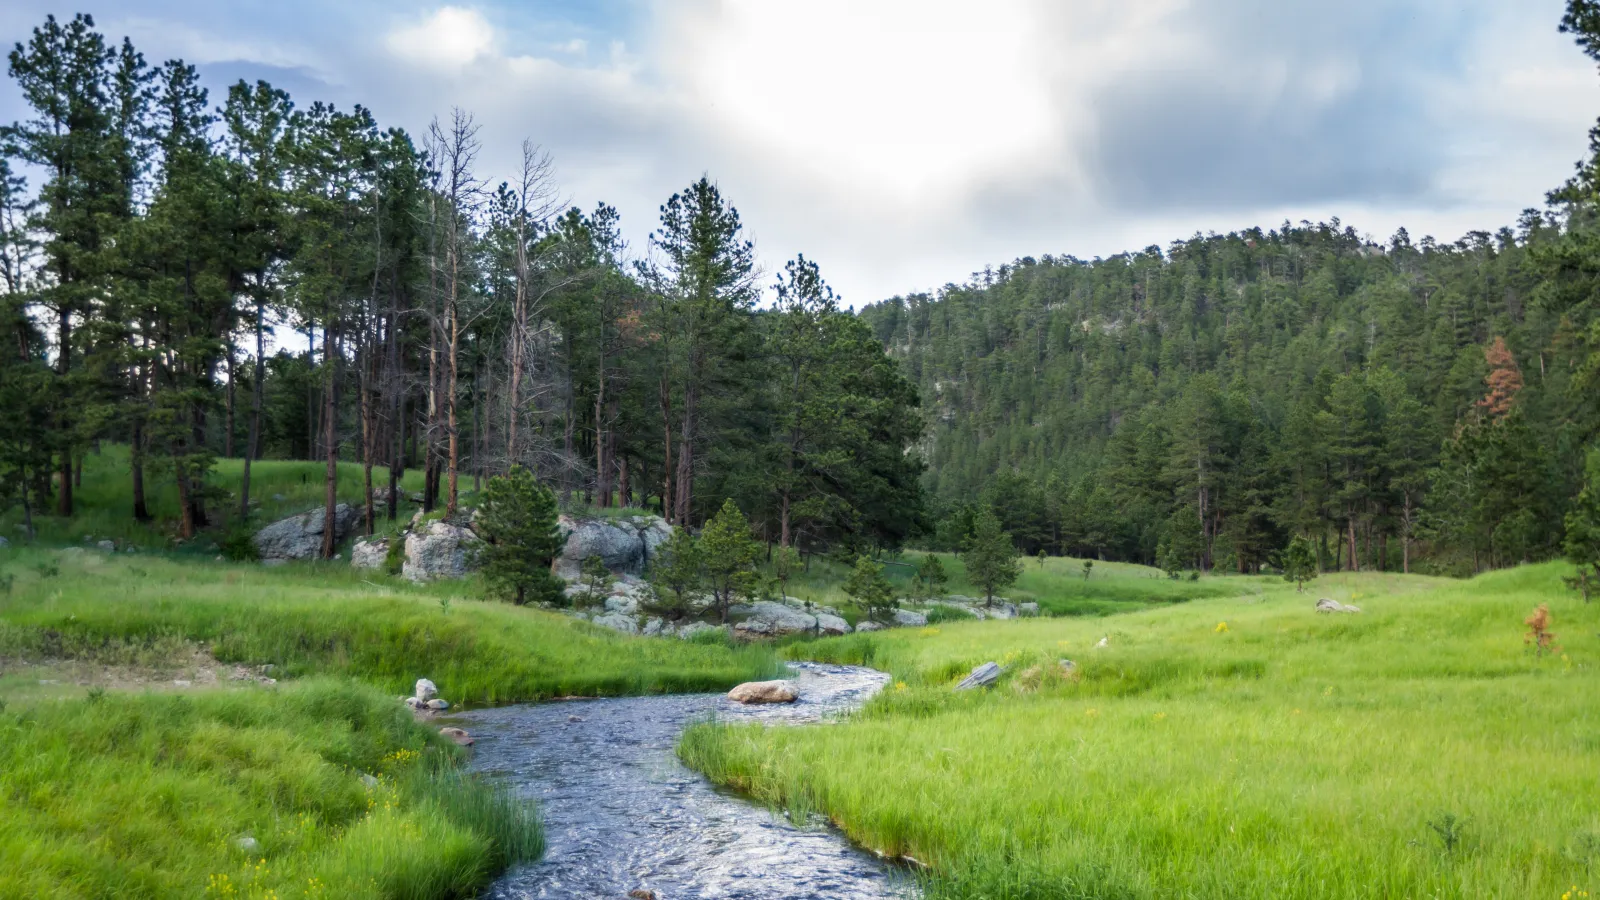 a stream running through a grassy area with trees and rocks in the background in South Dakota